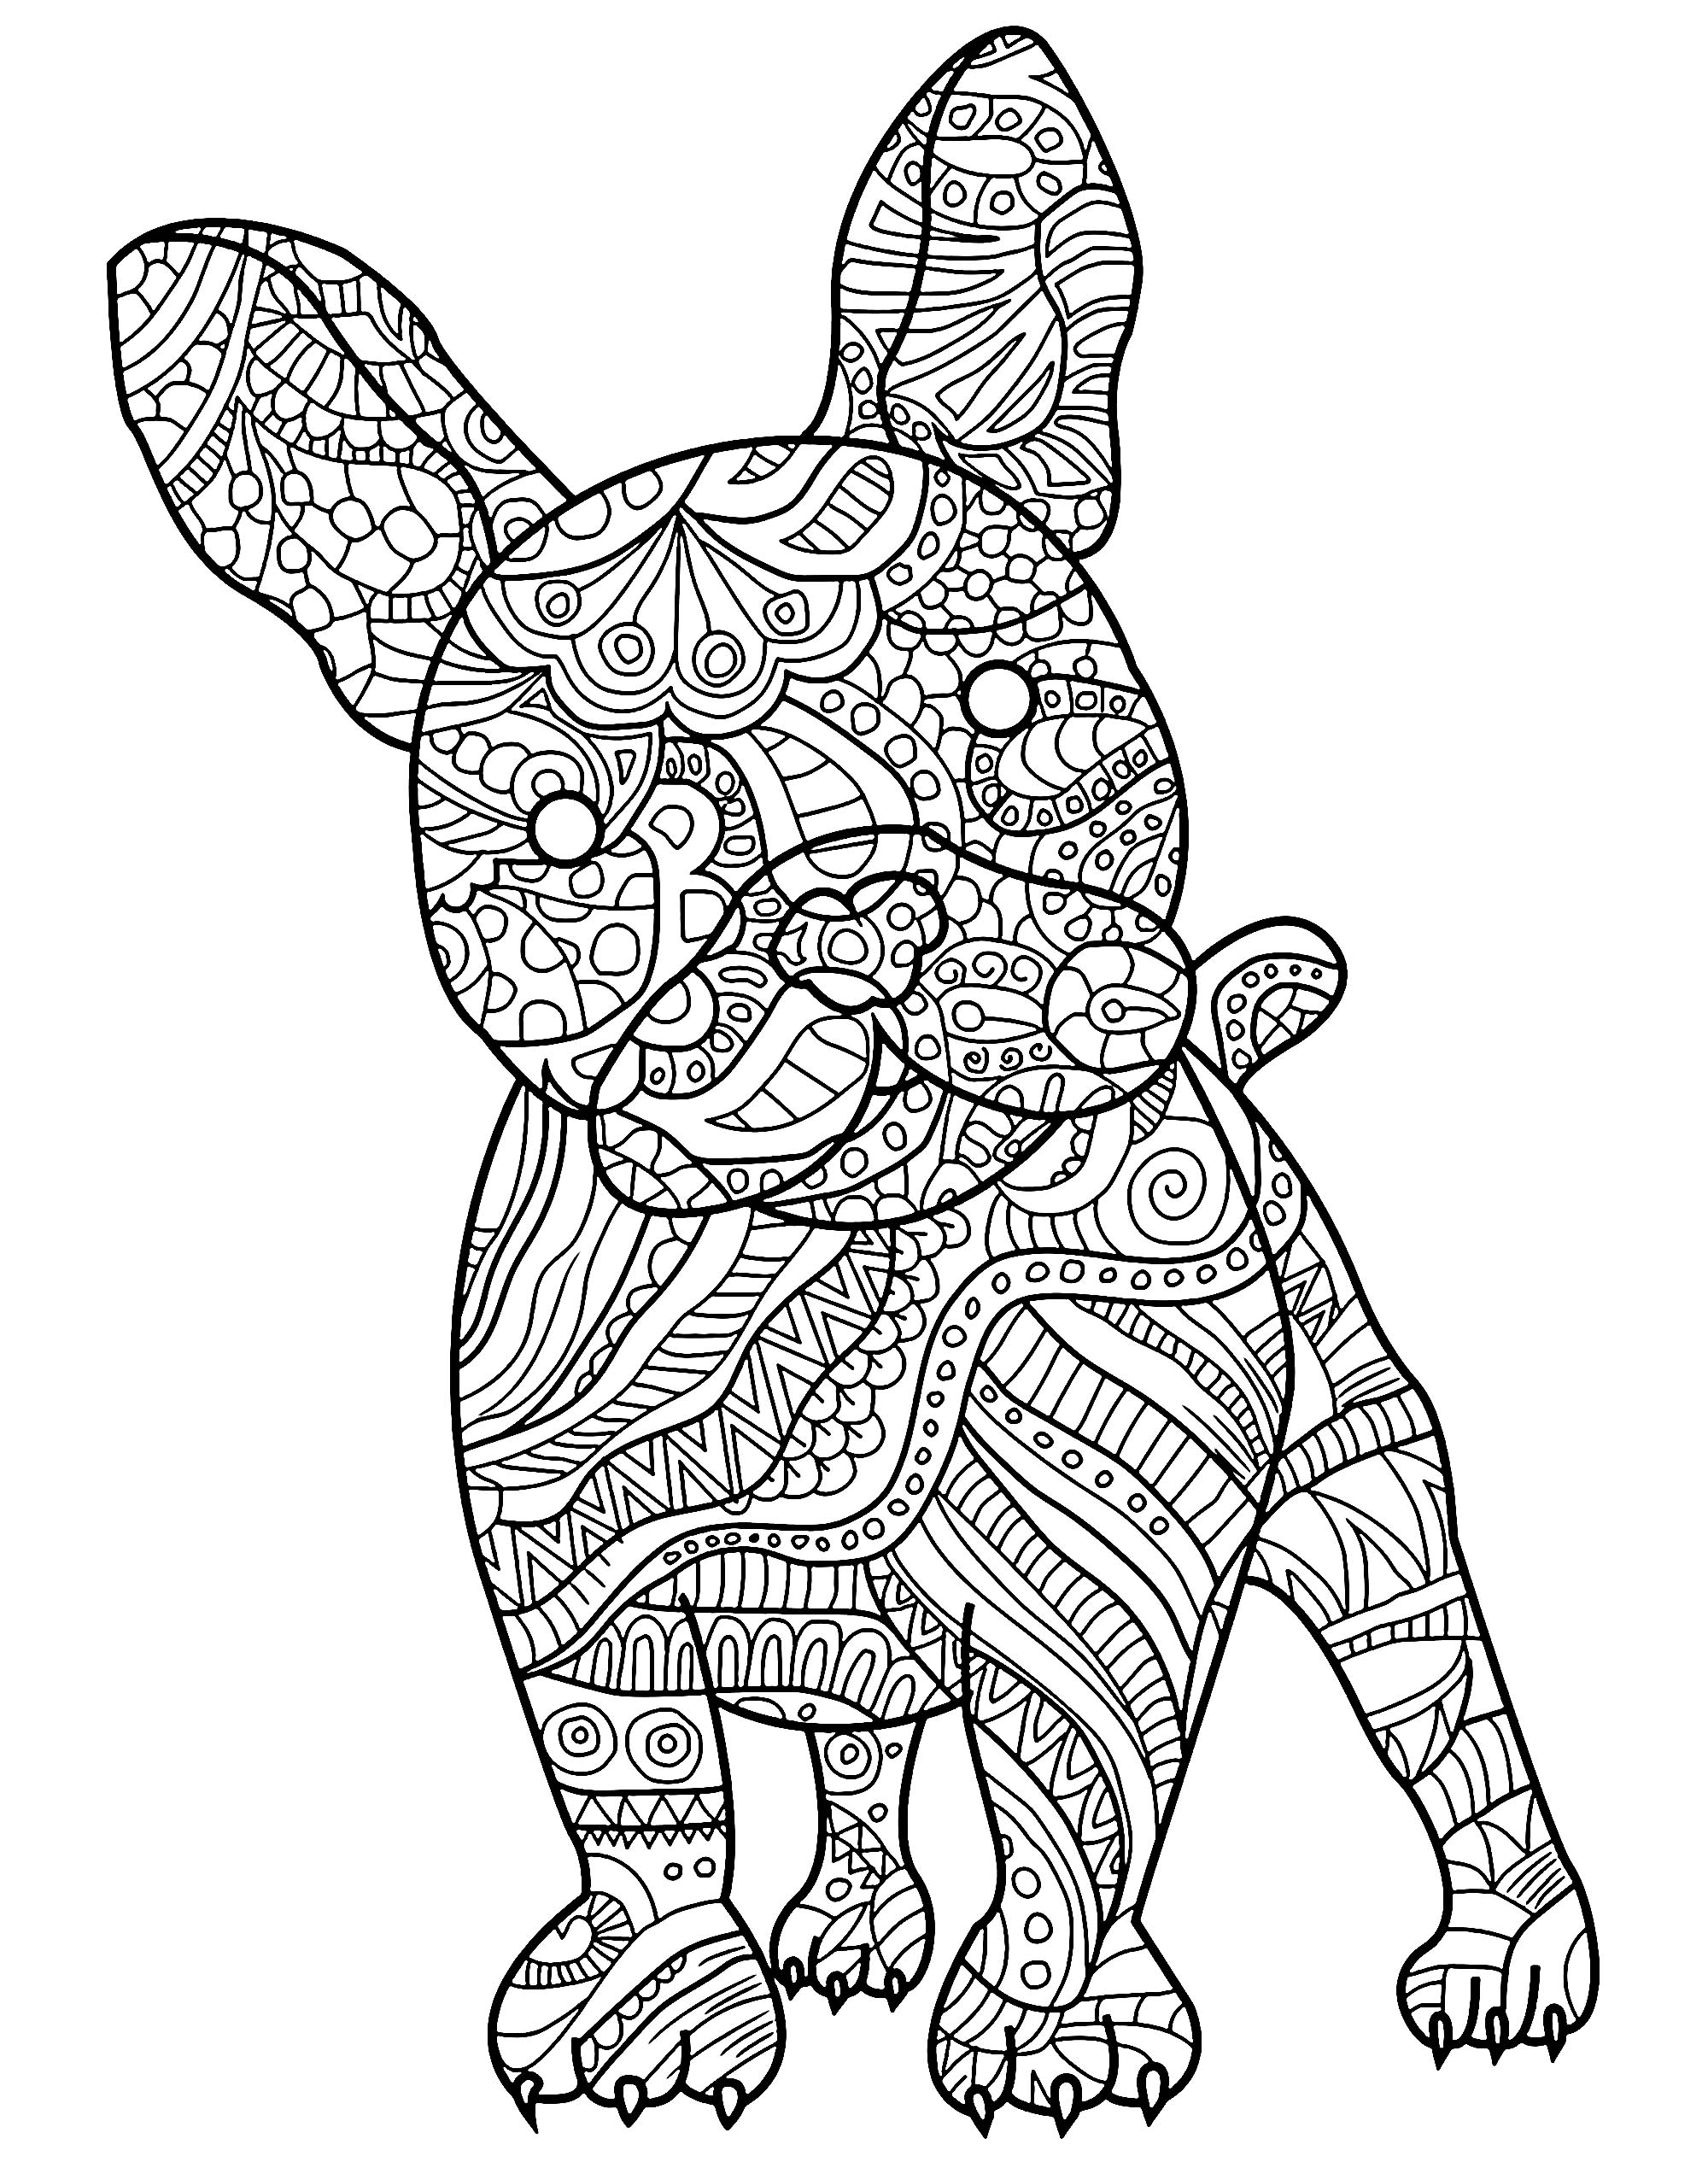 Dog to download for free Dogs Kids Coloring Pages